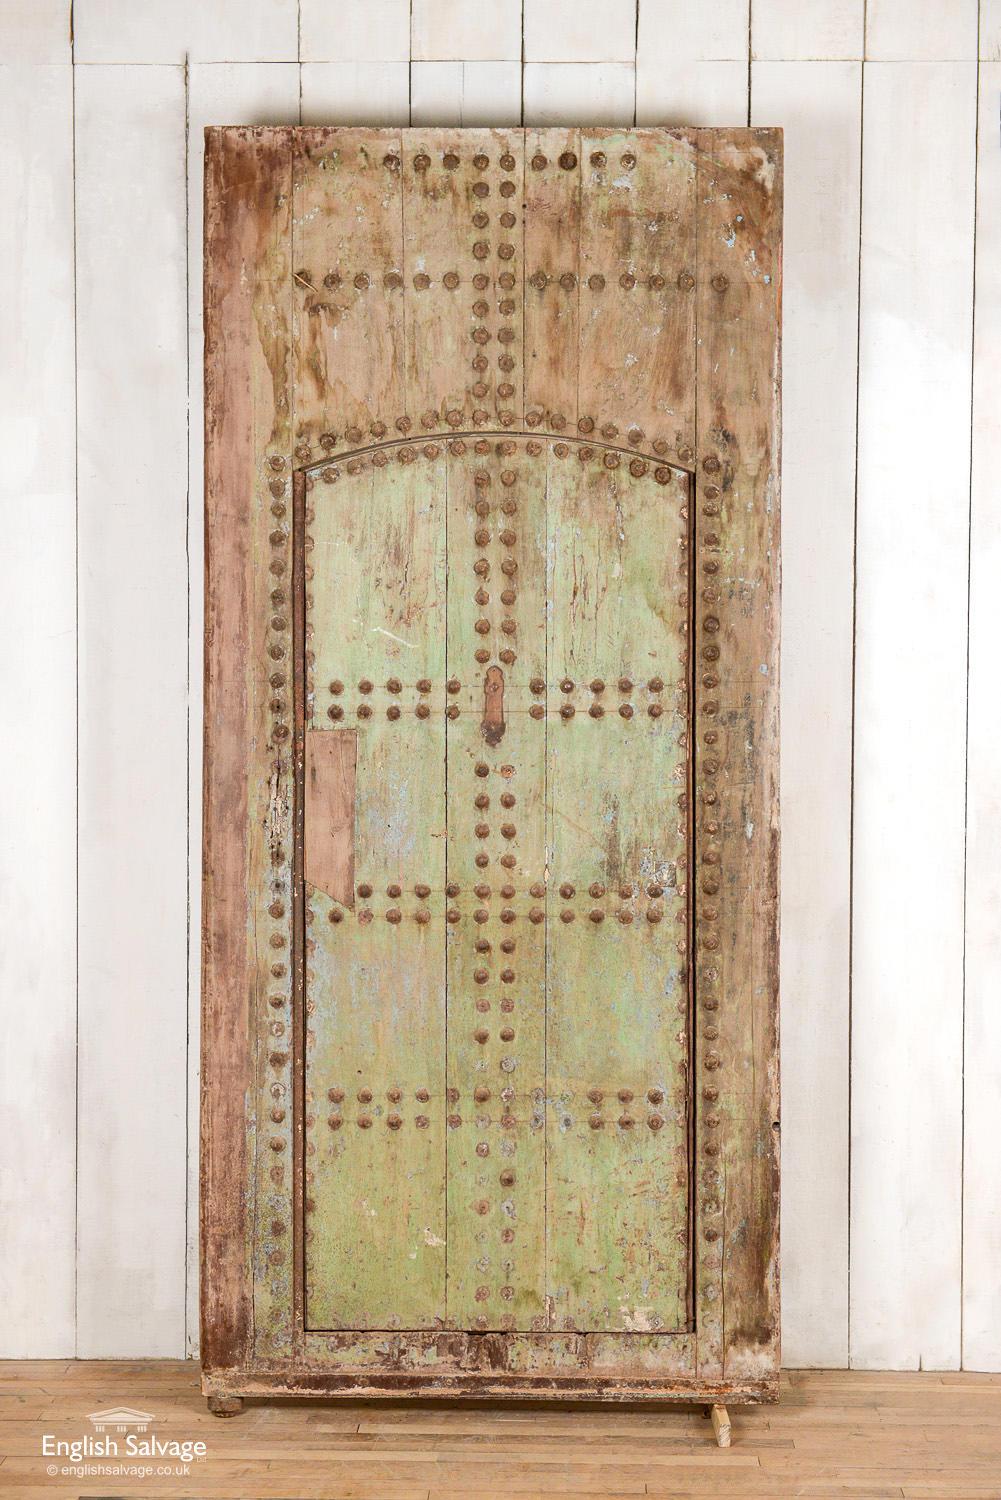 Old hardwood studded door in frame from Morocco. Lovely old paint patina and thick framed back to the door. Splits and scuffs commensurate with age.